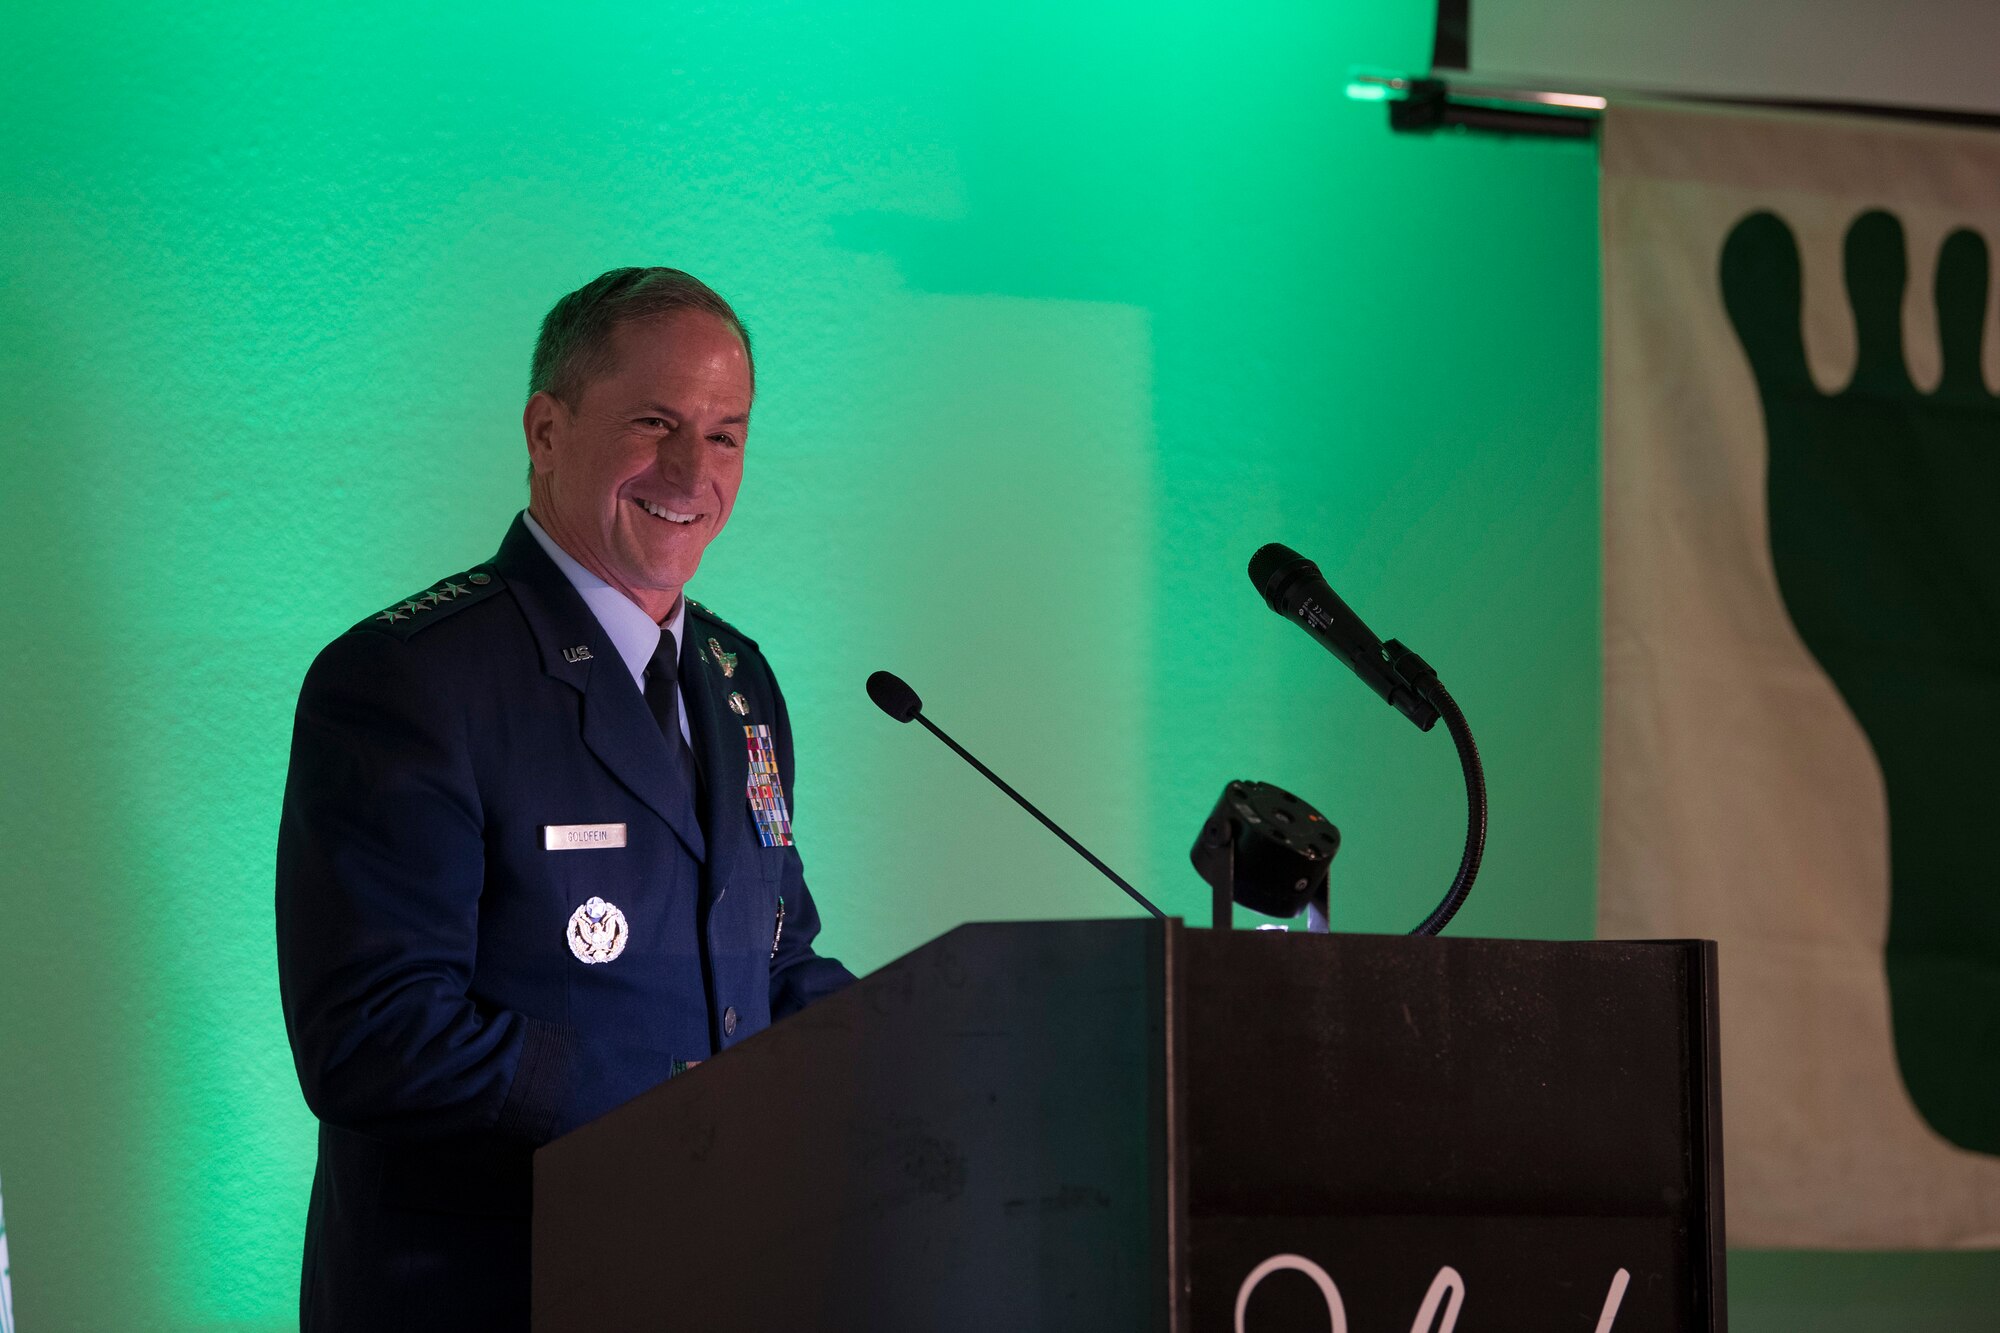 Air Force Chief of Staff Gen. David L. Goldfein speaks during the banquet celebrating the 50th reunion of the Jolly Green Association (JGA), May 4, 2019, in Fort Walton Beach, Fla. The JGA presented Airmen from the 41st Rescue Squadron (RQS) and the 48th RQS with the Rescue Mission of the Year award; the only non Air Force  rescue award recognized by the Air Force. Goldfein spoke about his own recovery after his F-16 Flying Falcon was shot down over Serbia on May 2, 1999. (U.S. Air Force Photo by Staff Sgt. Janiqua P. Robinson)